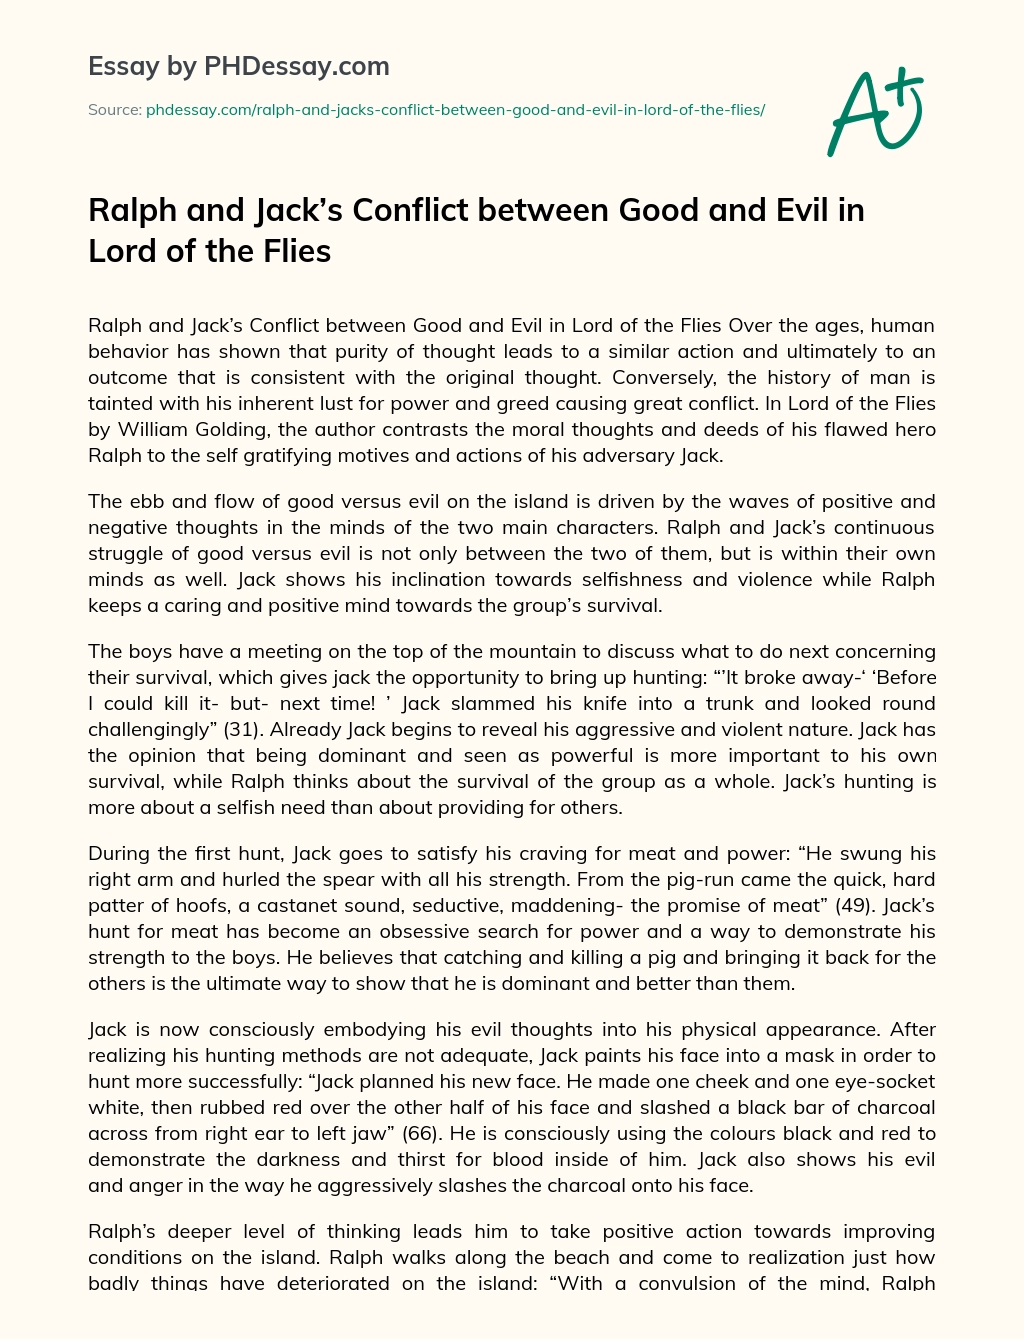 Ralph and Jack’s Conflict between Good and Evil in Lord of the Flies essay